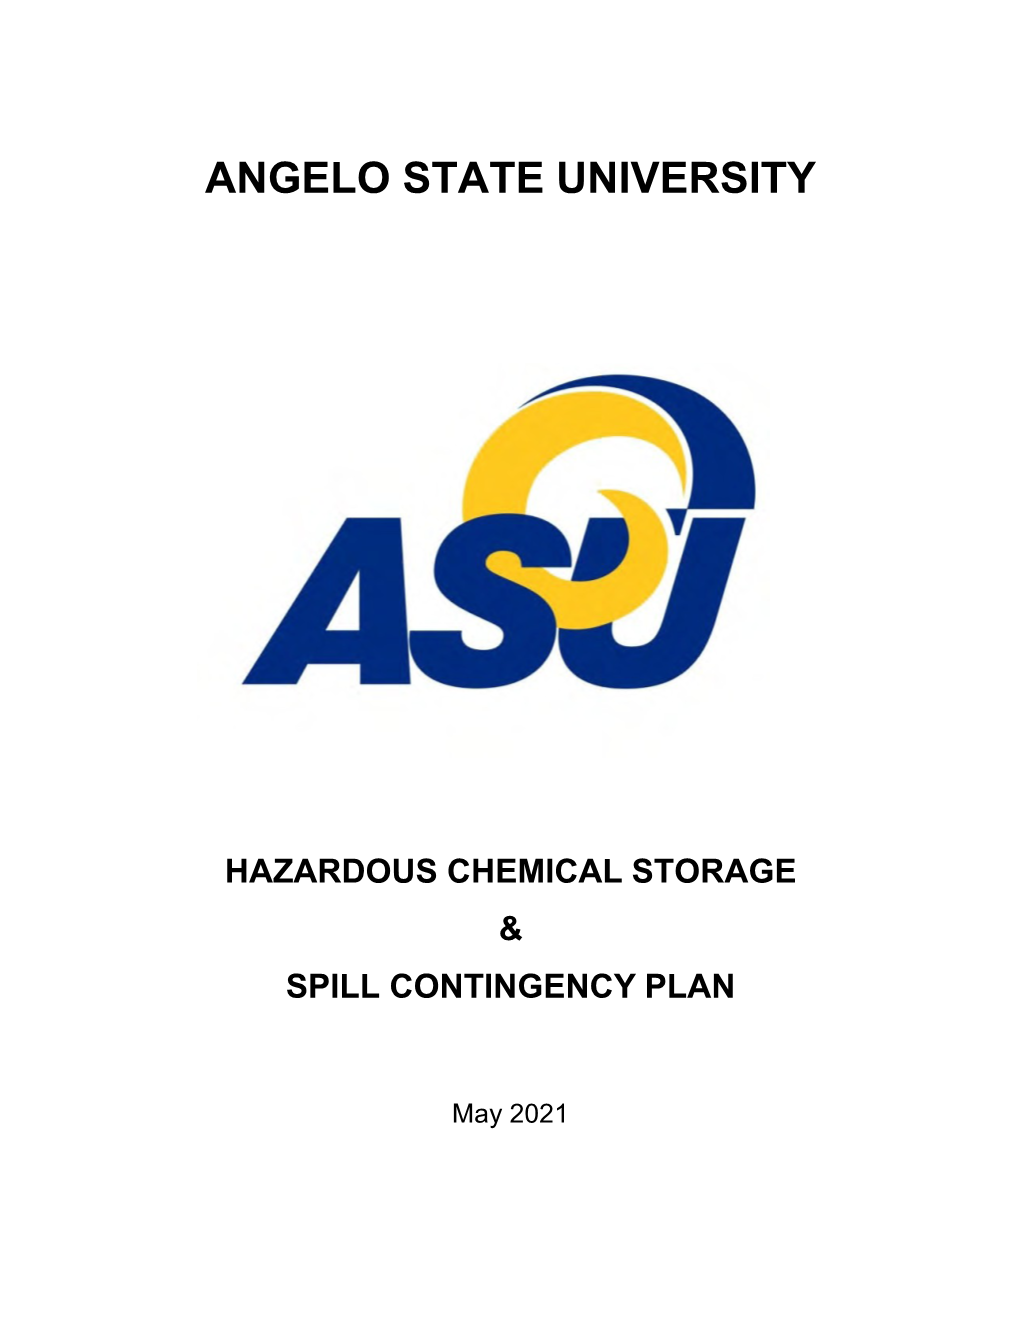 Hazardous Chemical Storage and Spill Contingency Plan